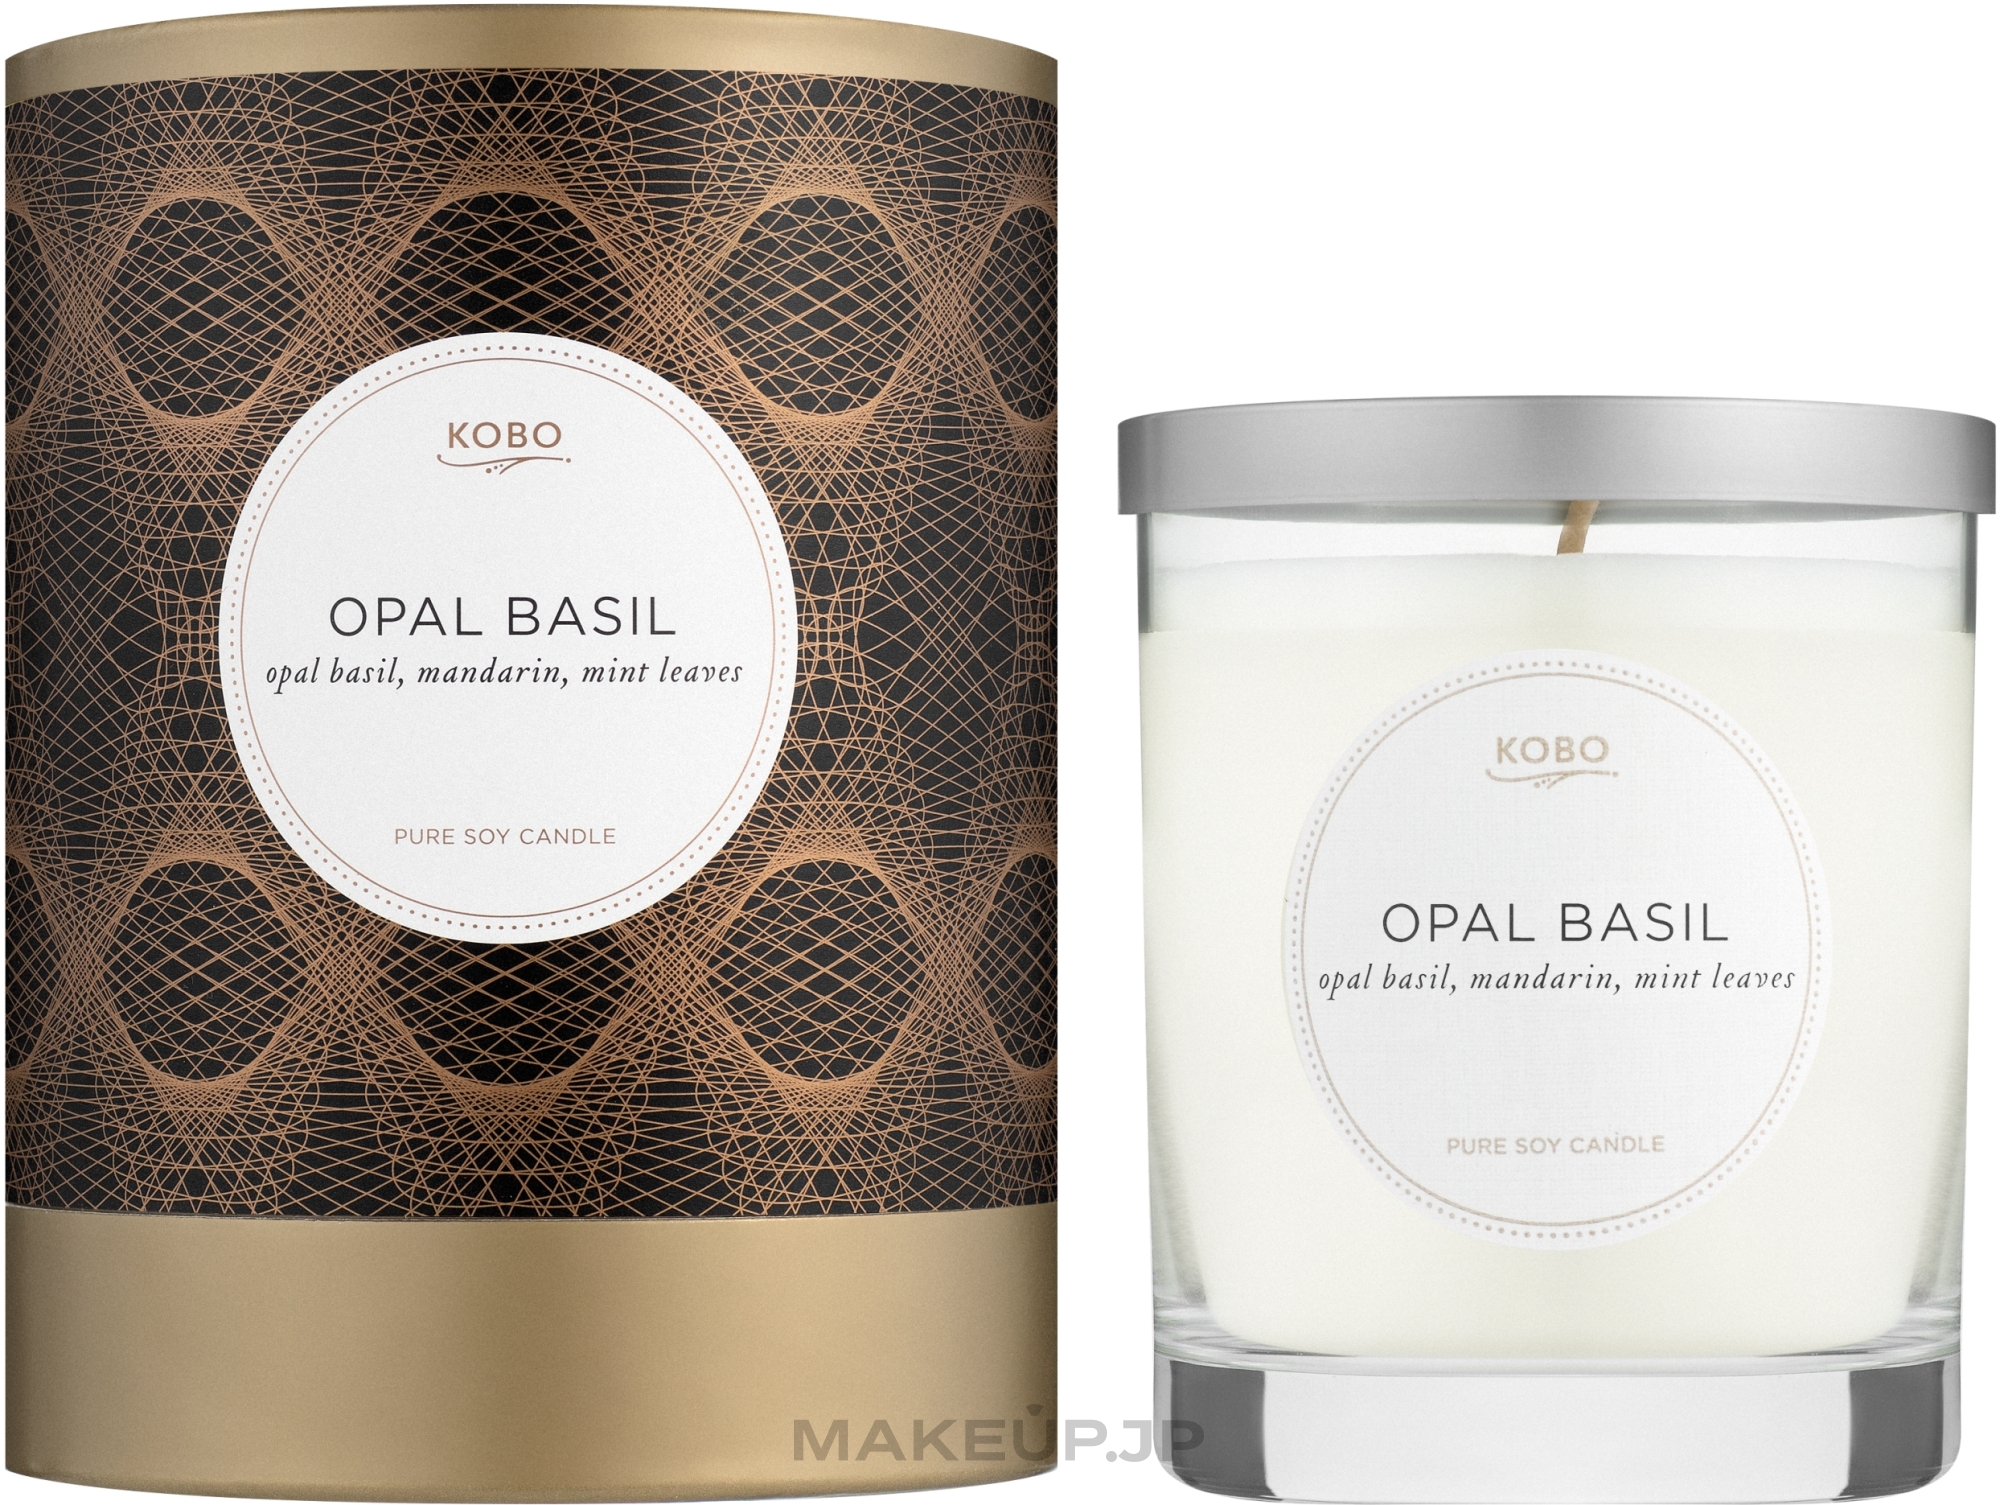 Kobo Opal Basil - Scented Candle — photo 312 g